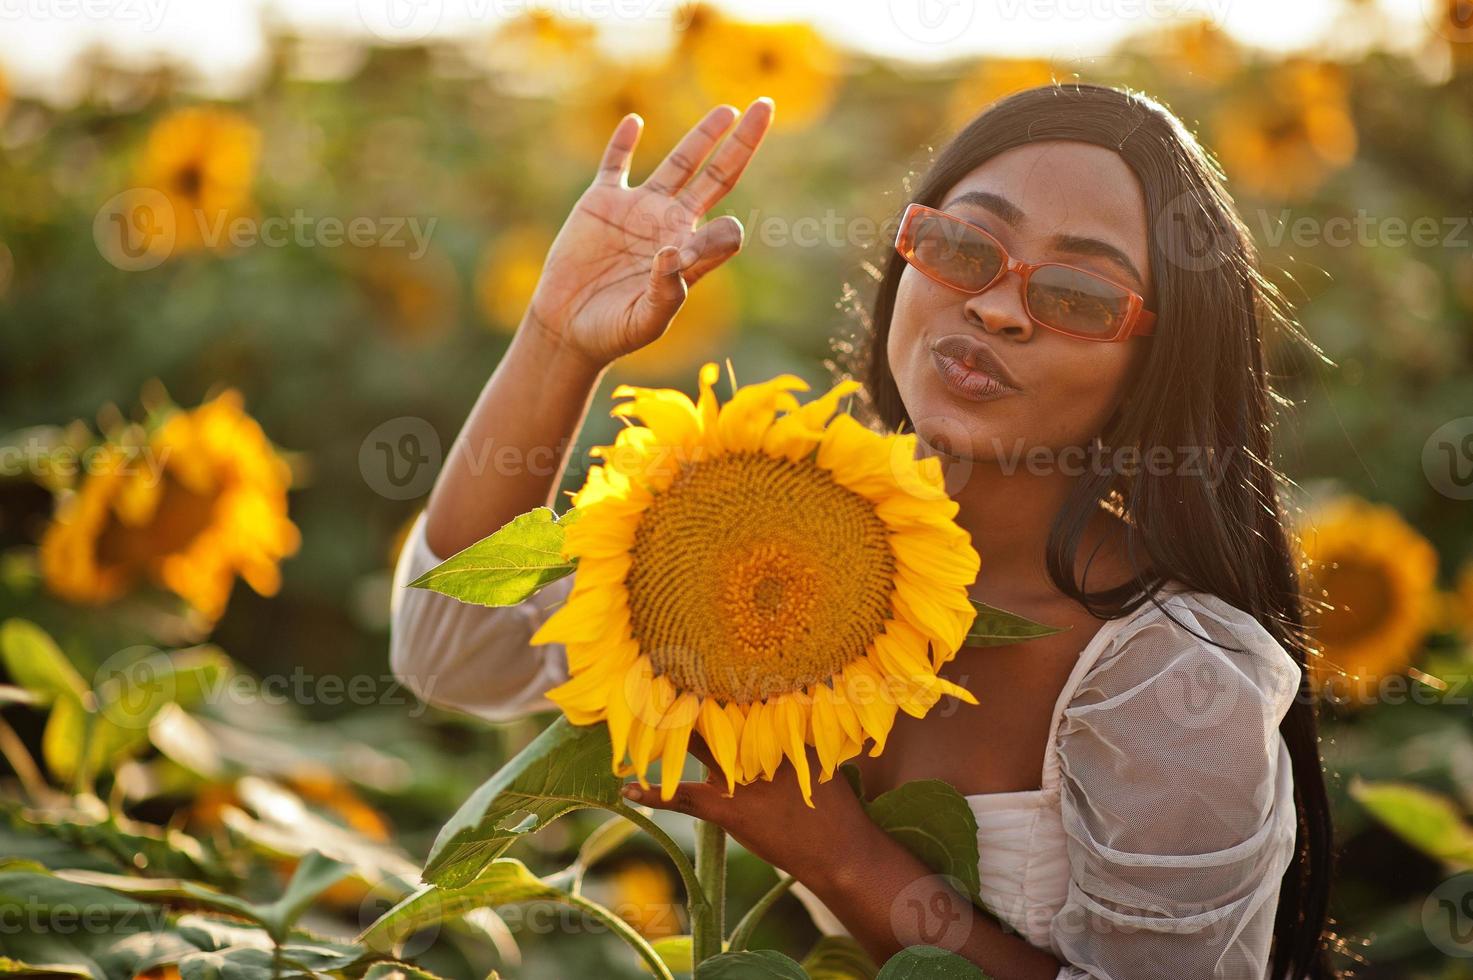 Pretty young black woman wear summer dress pose in a sunflower field. photo